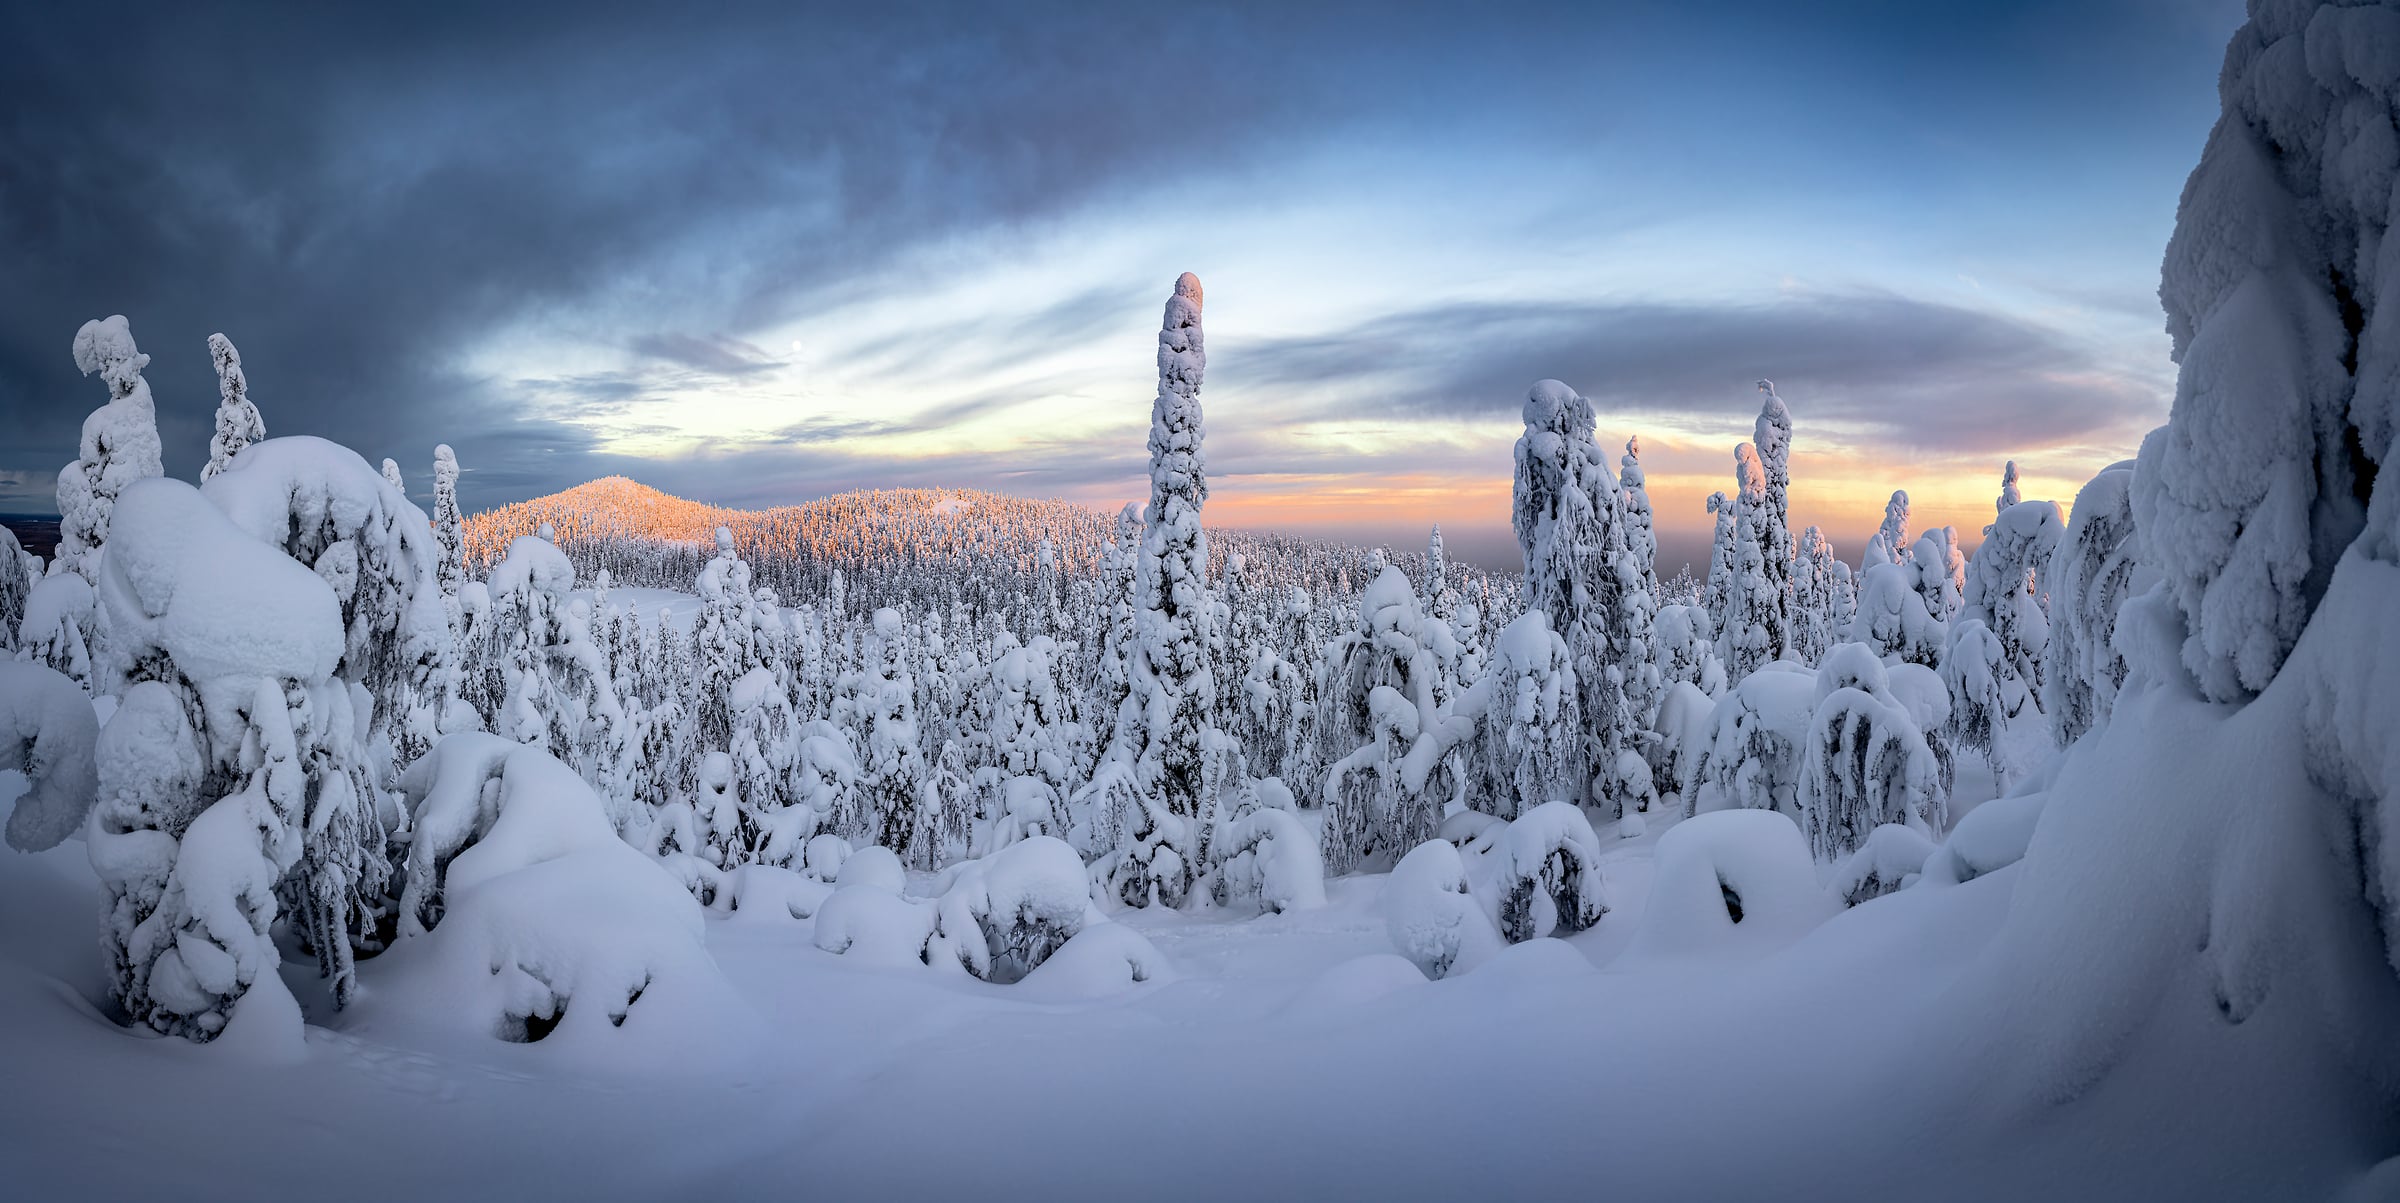 319 megapixels! A very high resolution, large-format VAST photo print of a winter scene with snow-covered trees; photograph created by Roberto Moiola in Ruka, Finland.